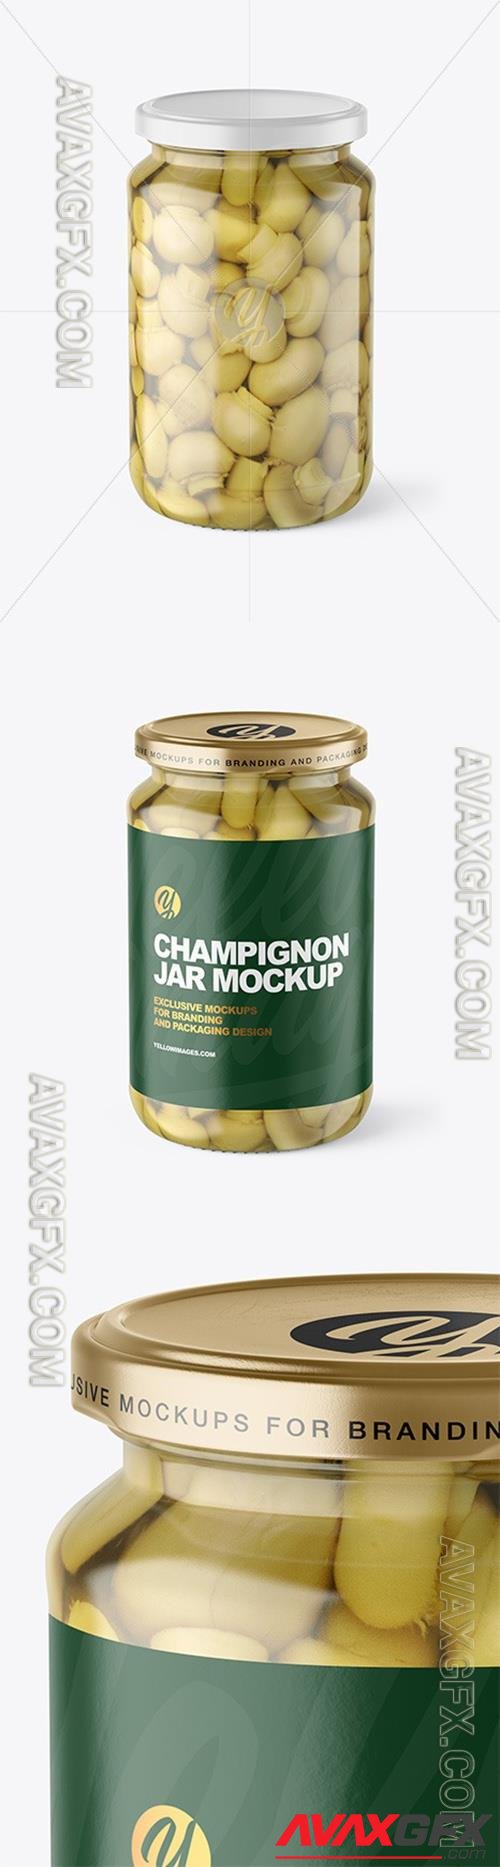 Clear Glass Jar with Champignons Mockup 97185 TIF